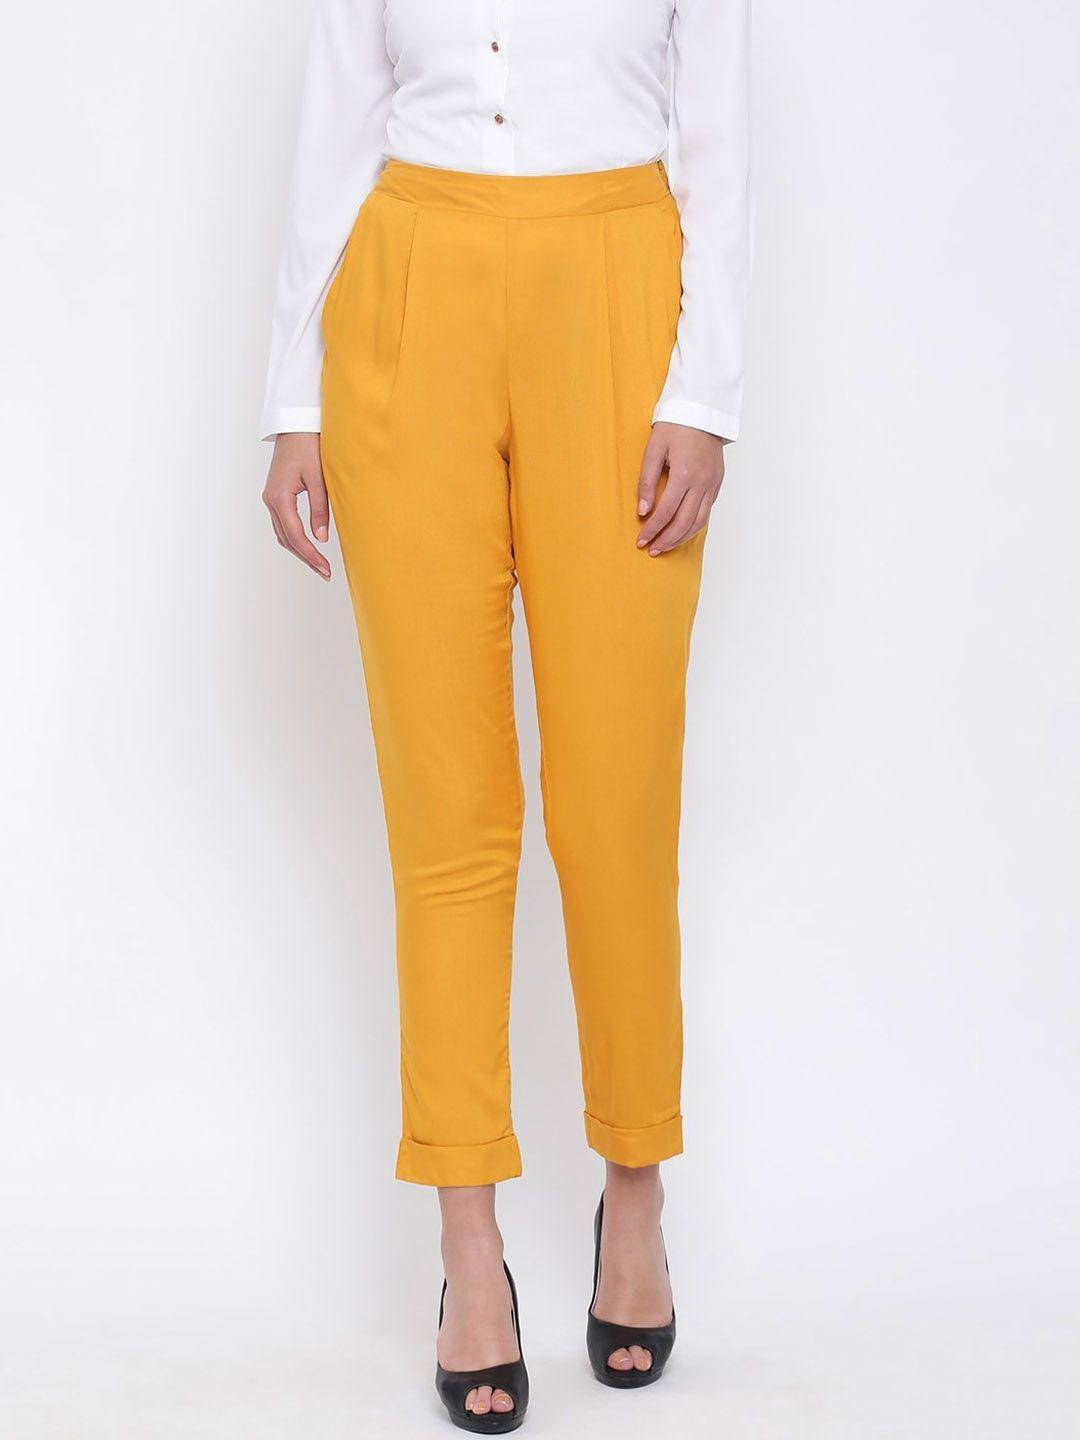 oxolloxo-women-yellow-regular-fit-solid-trousers